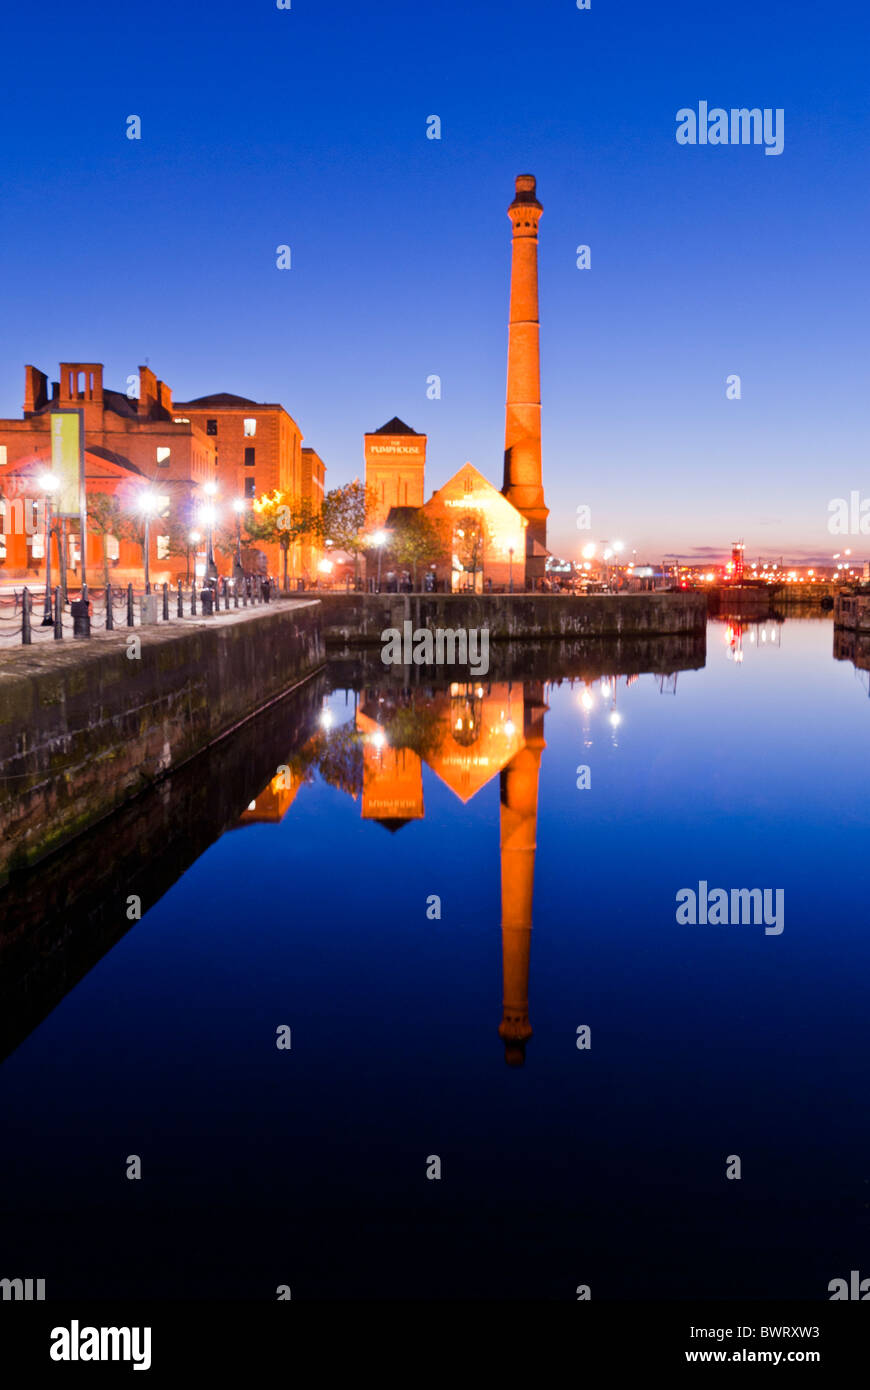 Reflection of The Pumphouse and warehousing at Liverpool docks, England, UK Stock Photo